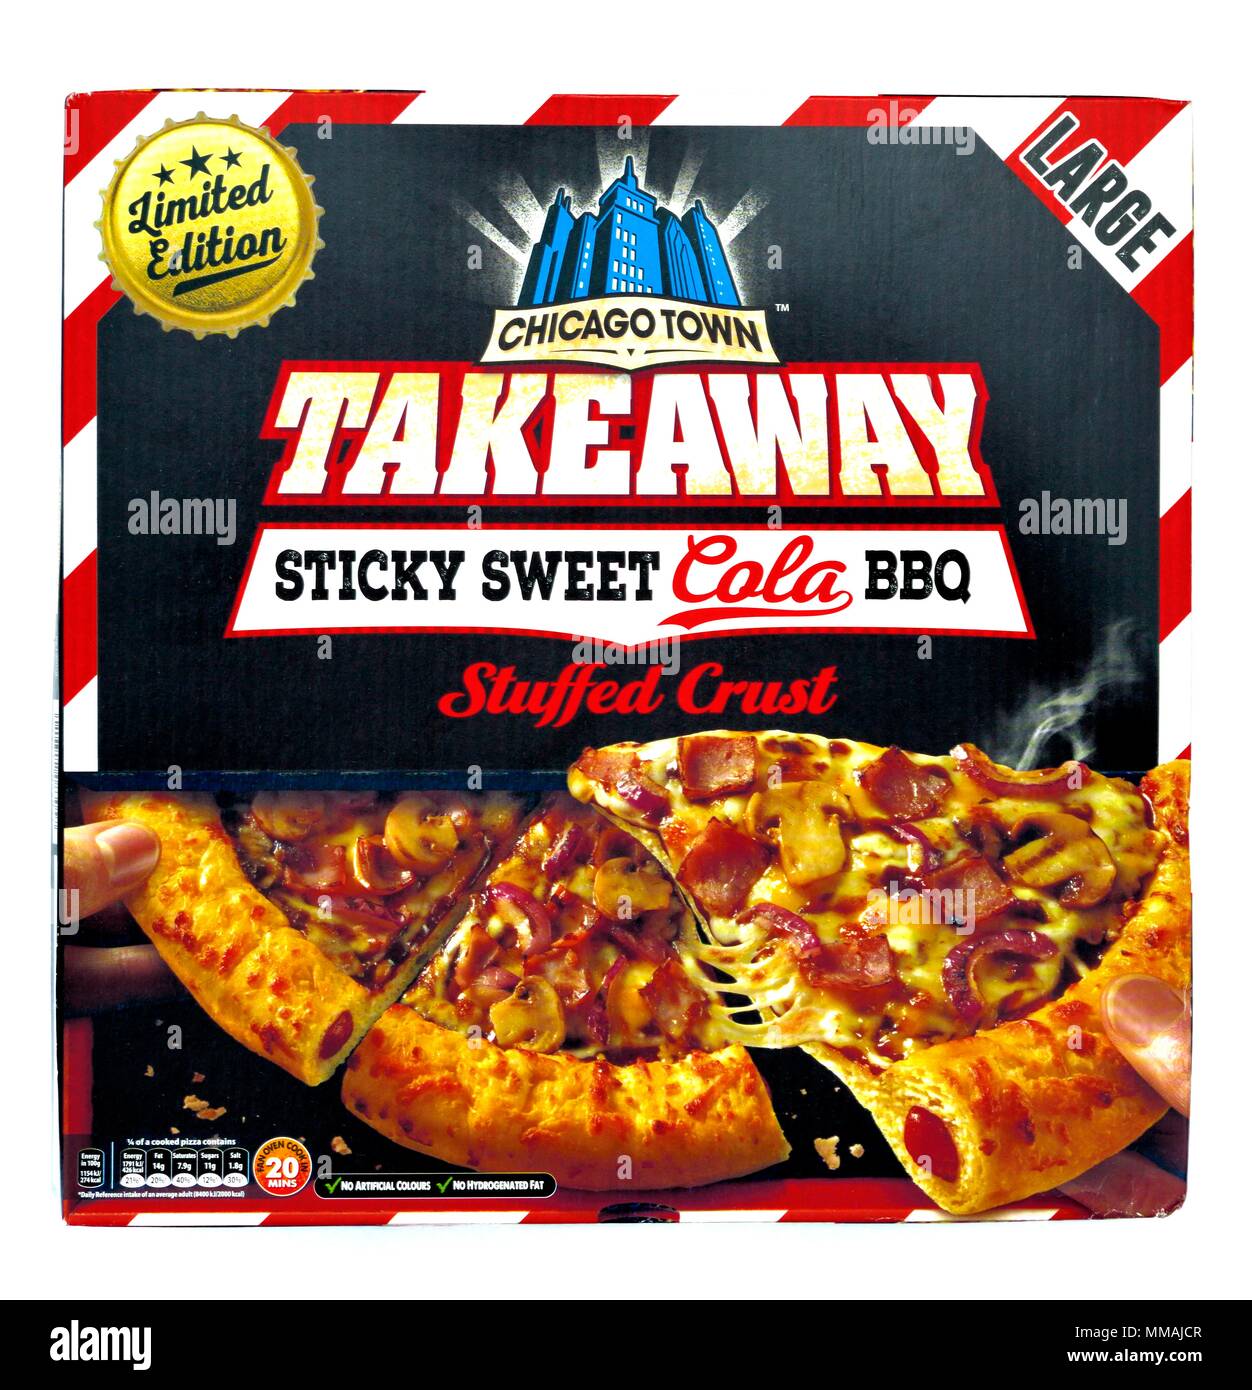 Limited edition Chicago Town takeaway Sticky sweet cola barbecue stuffed crust pizza box Stock Photo